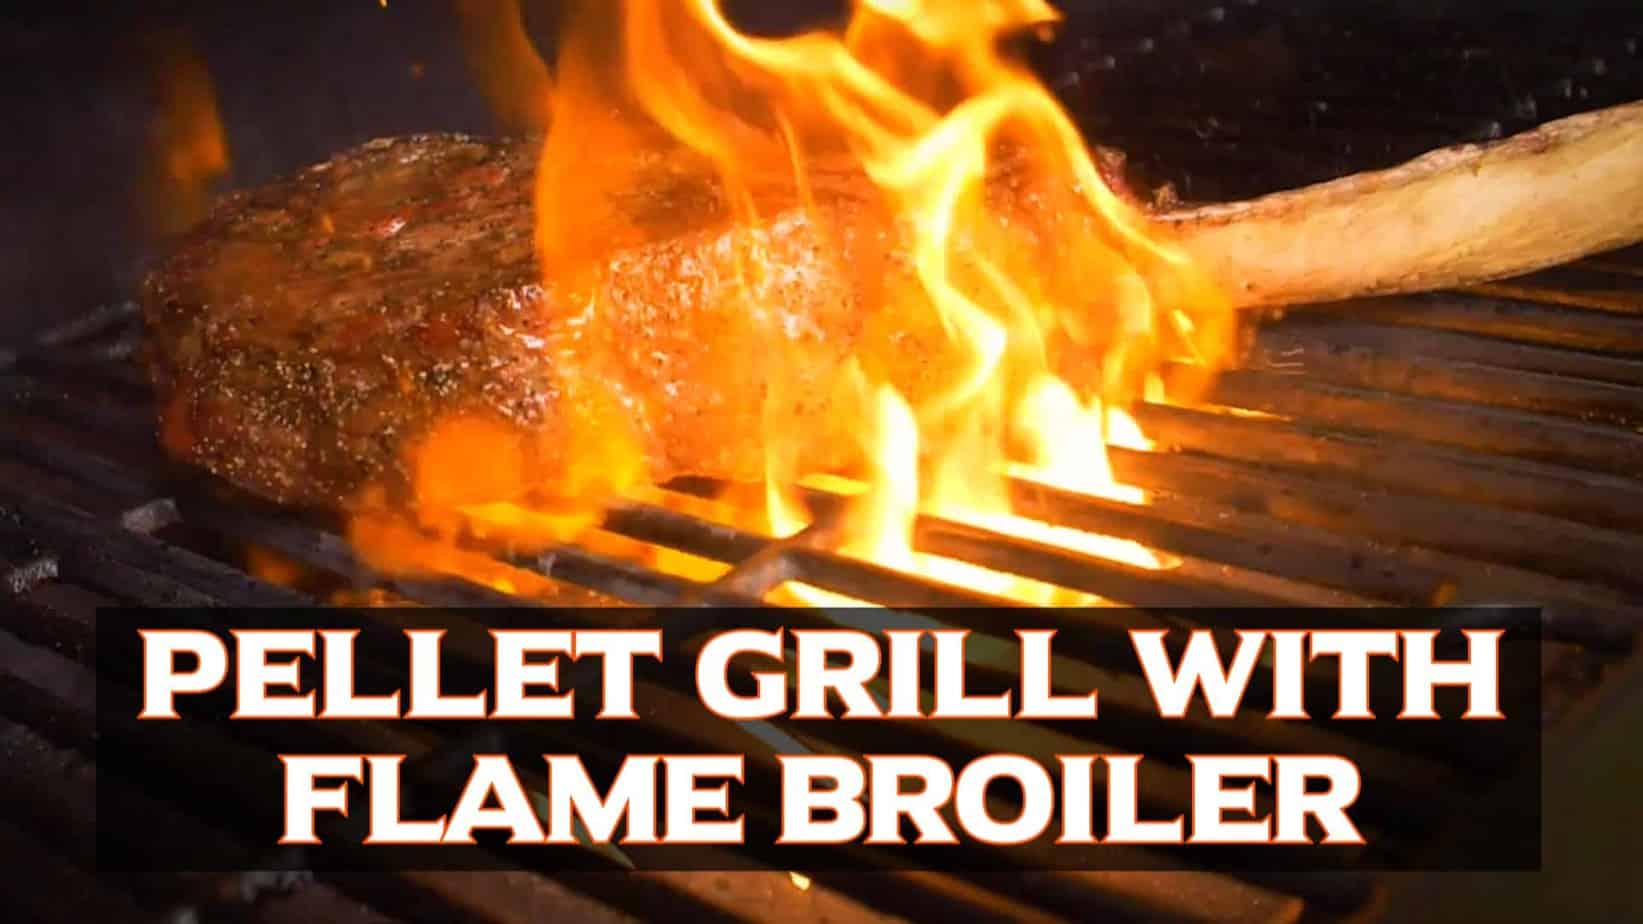 Pellet Grill With Flame Broiler